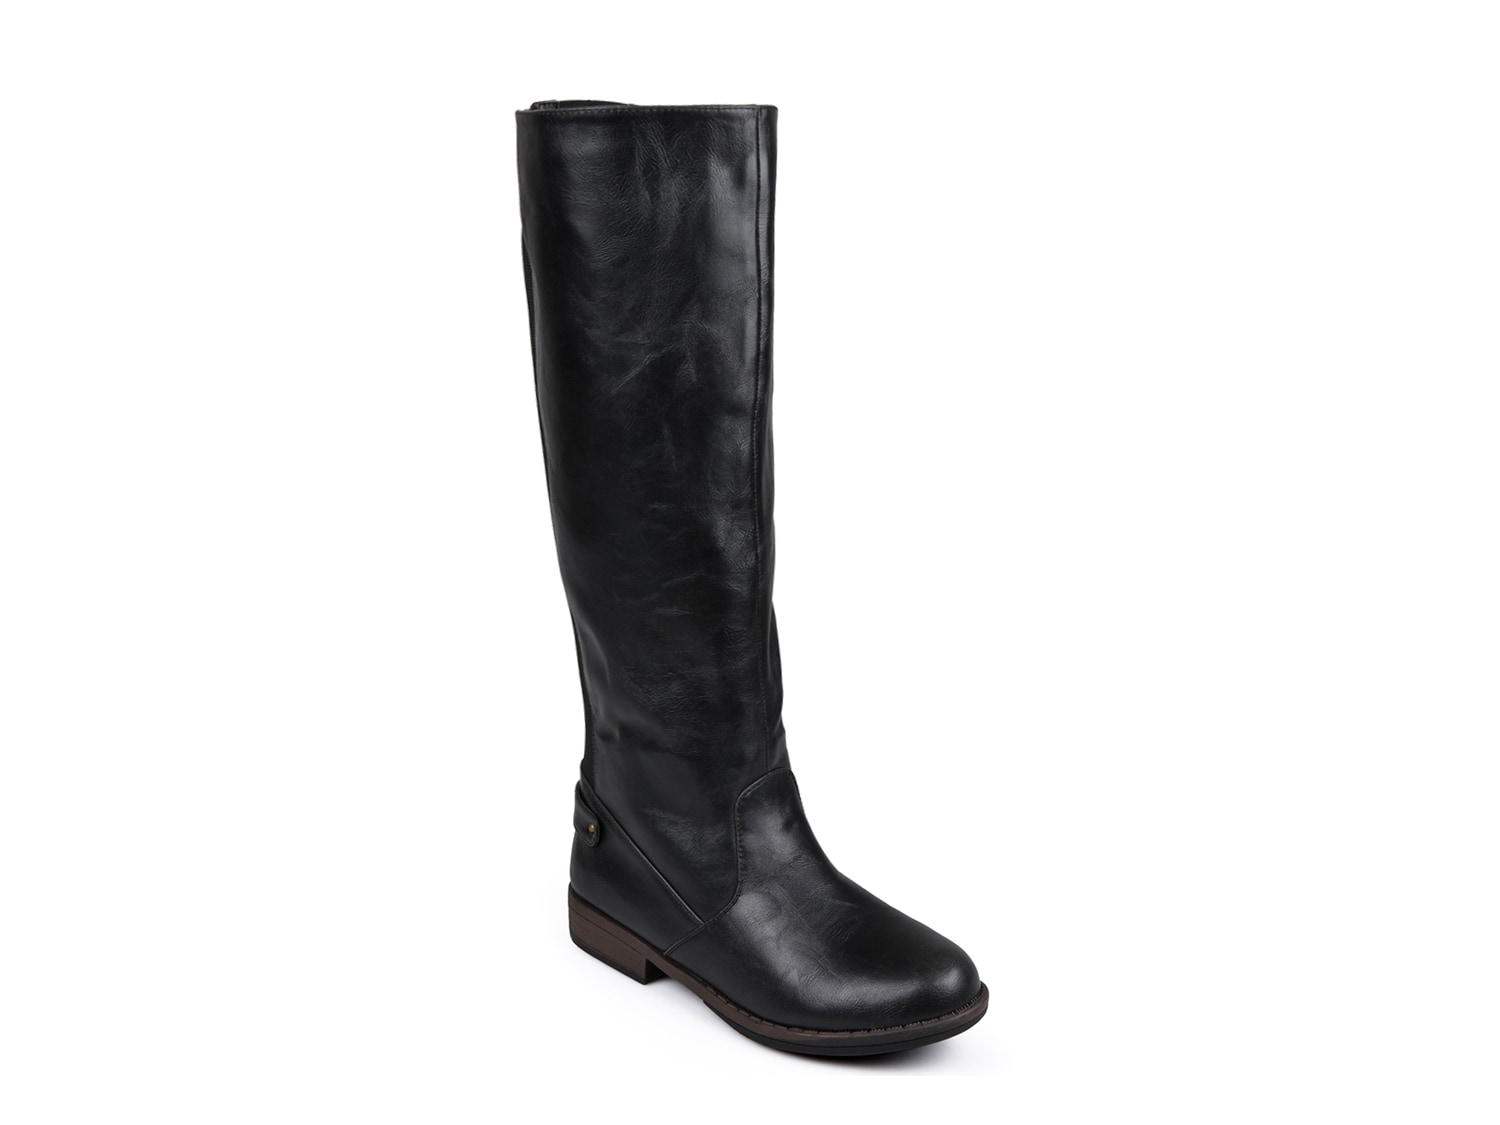 Journee Collection Lynn Wide Calf Riding Boot - Free Shipping | DSW